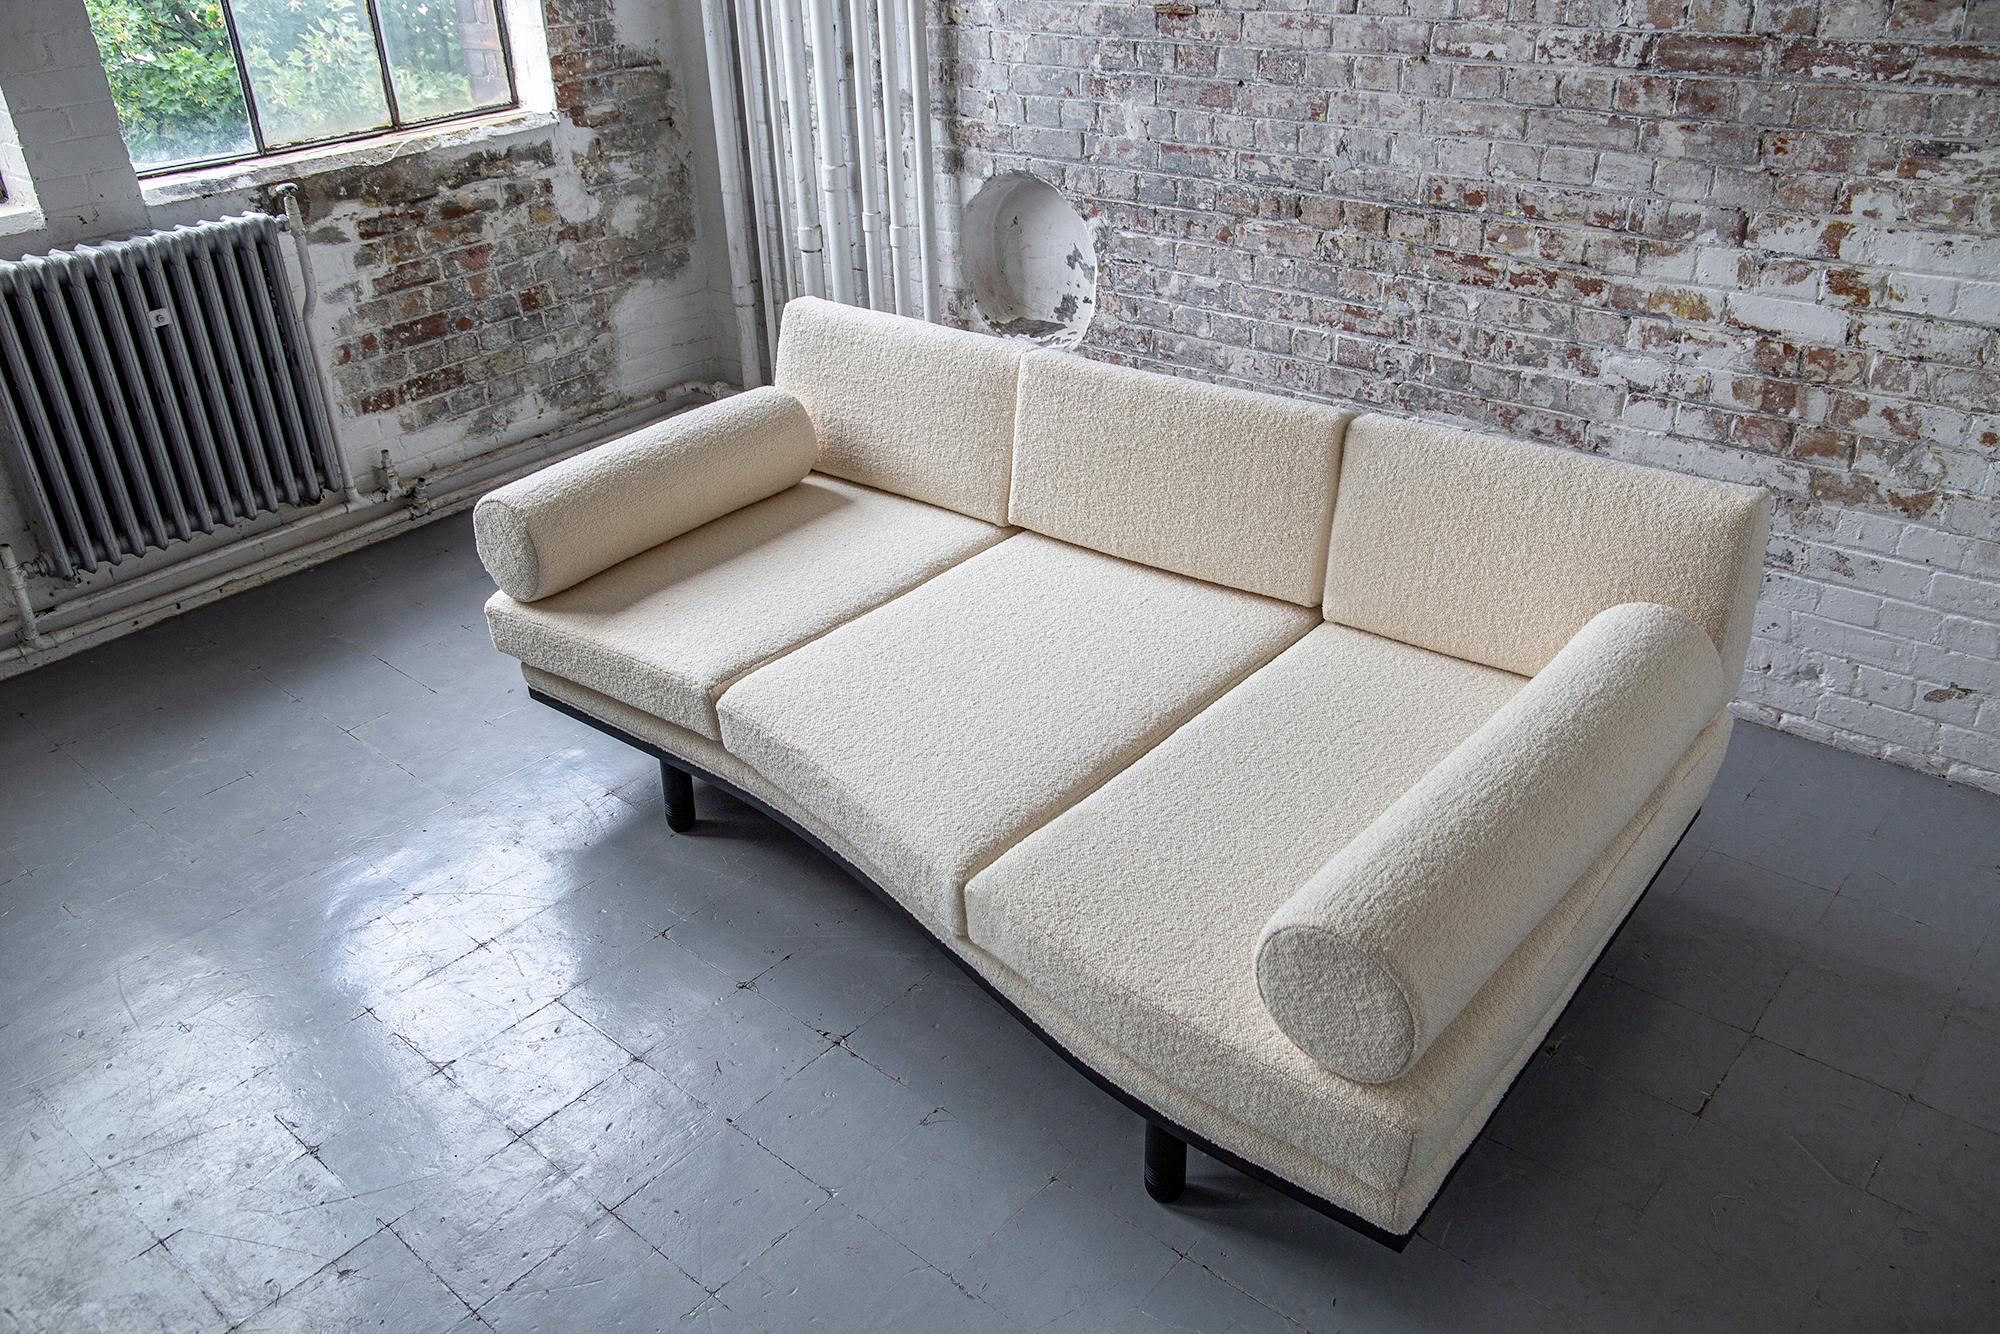 A decadent three-seat sofa daybed of sculptural trapezoidal form inspired by the fallen architectural ruins of the ancient city of Baalbek, a Levantine outpost on the Roman frontier. Featuring plinth bolsters, removable arched back support and deep